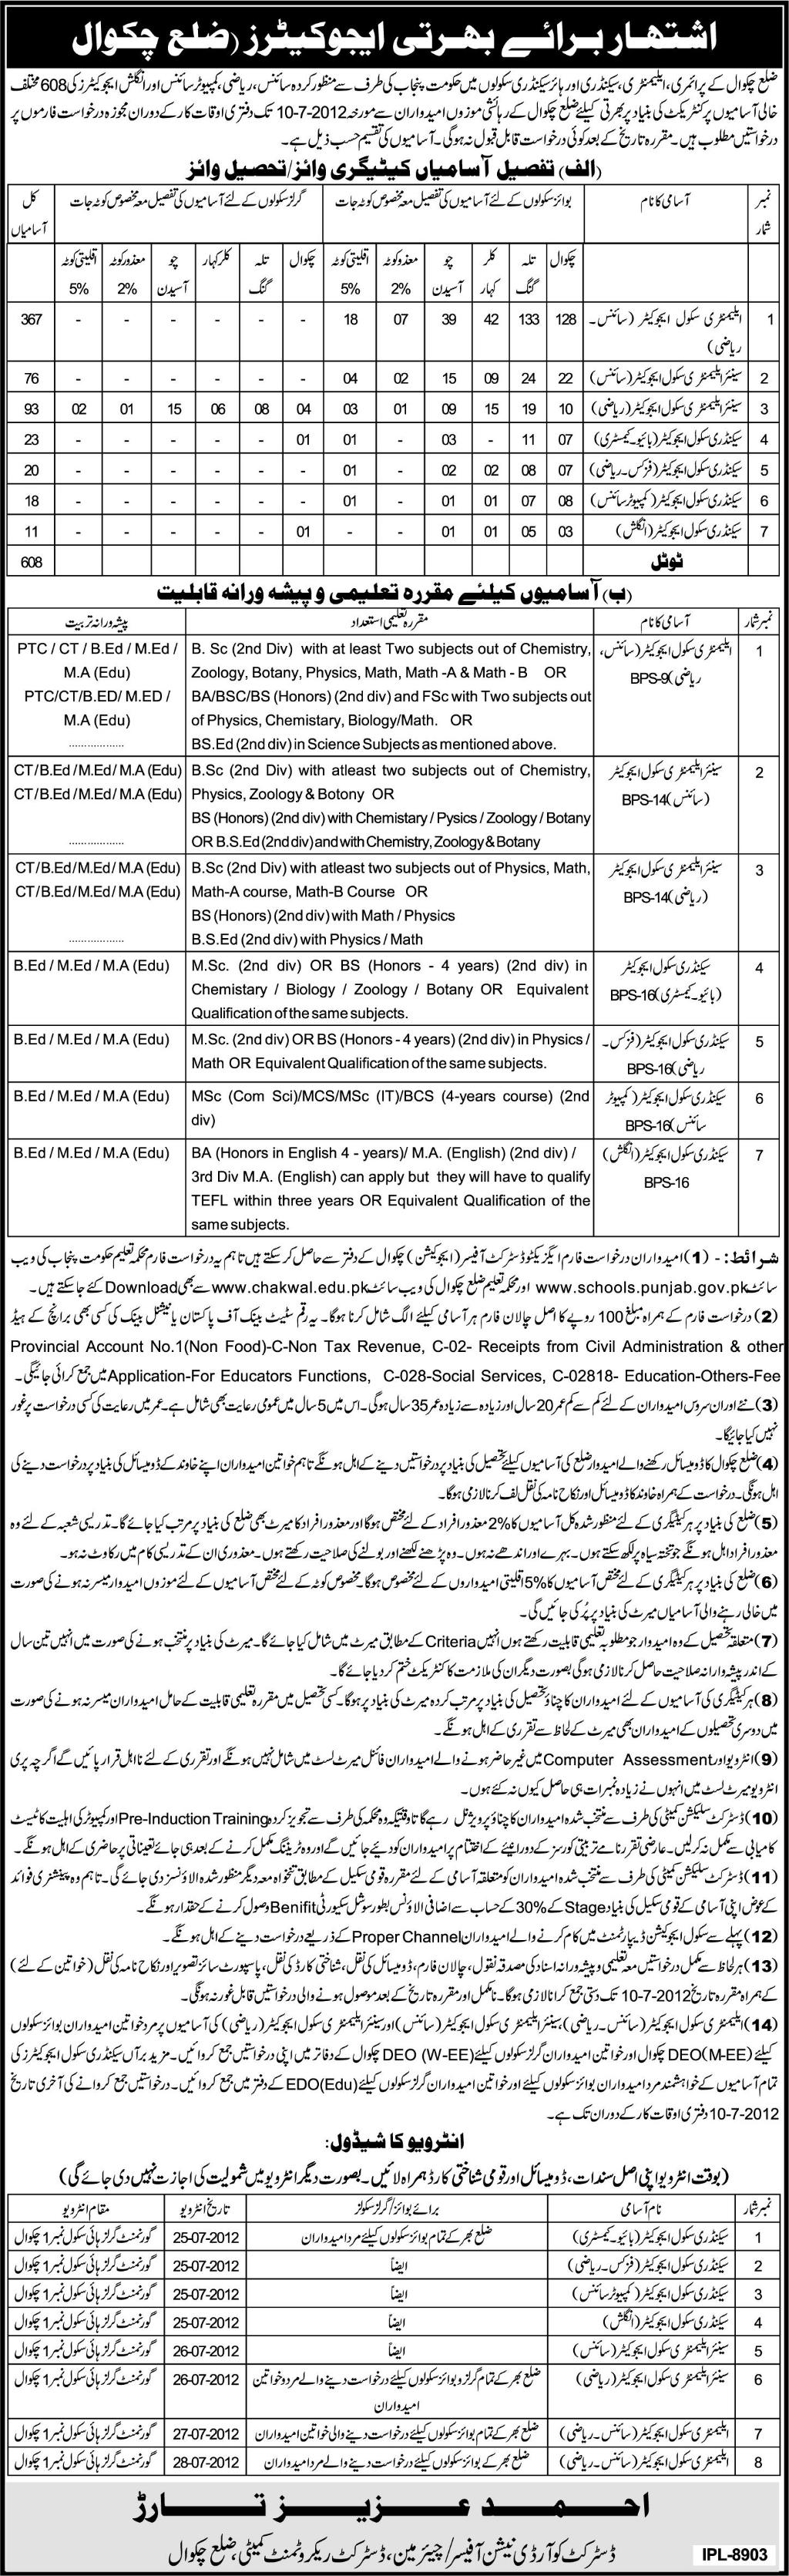 Teachers/Educators Required by Government of Punjab at Primary, Elementary, Secondary and Higher Secondary Schools (Chakwal District) (608 Vacancies) (Govt. Job)